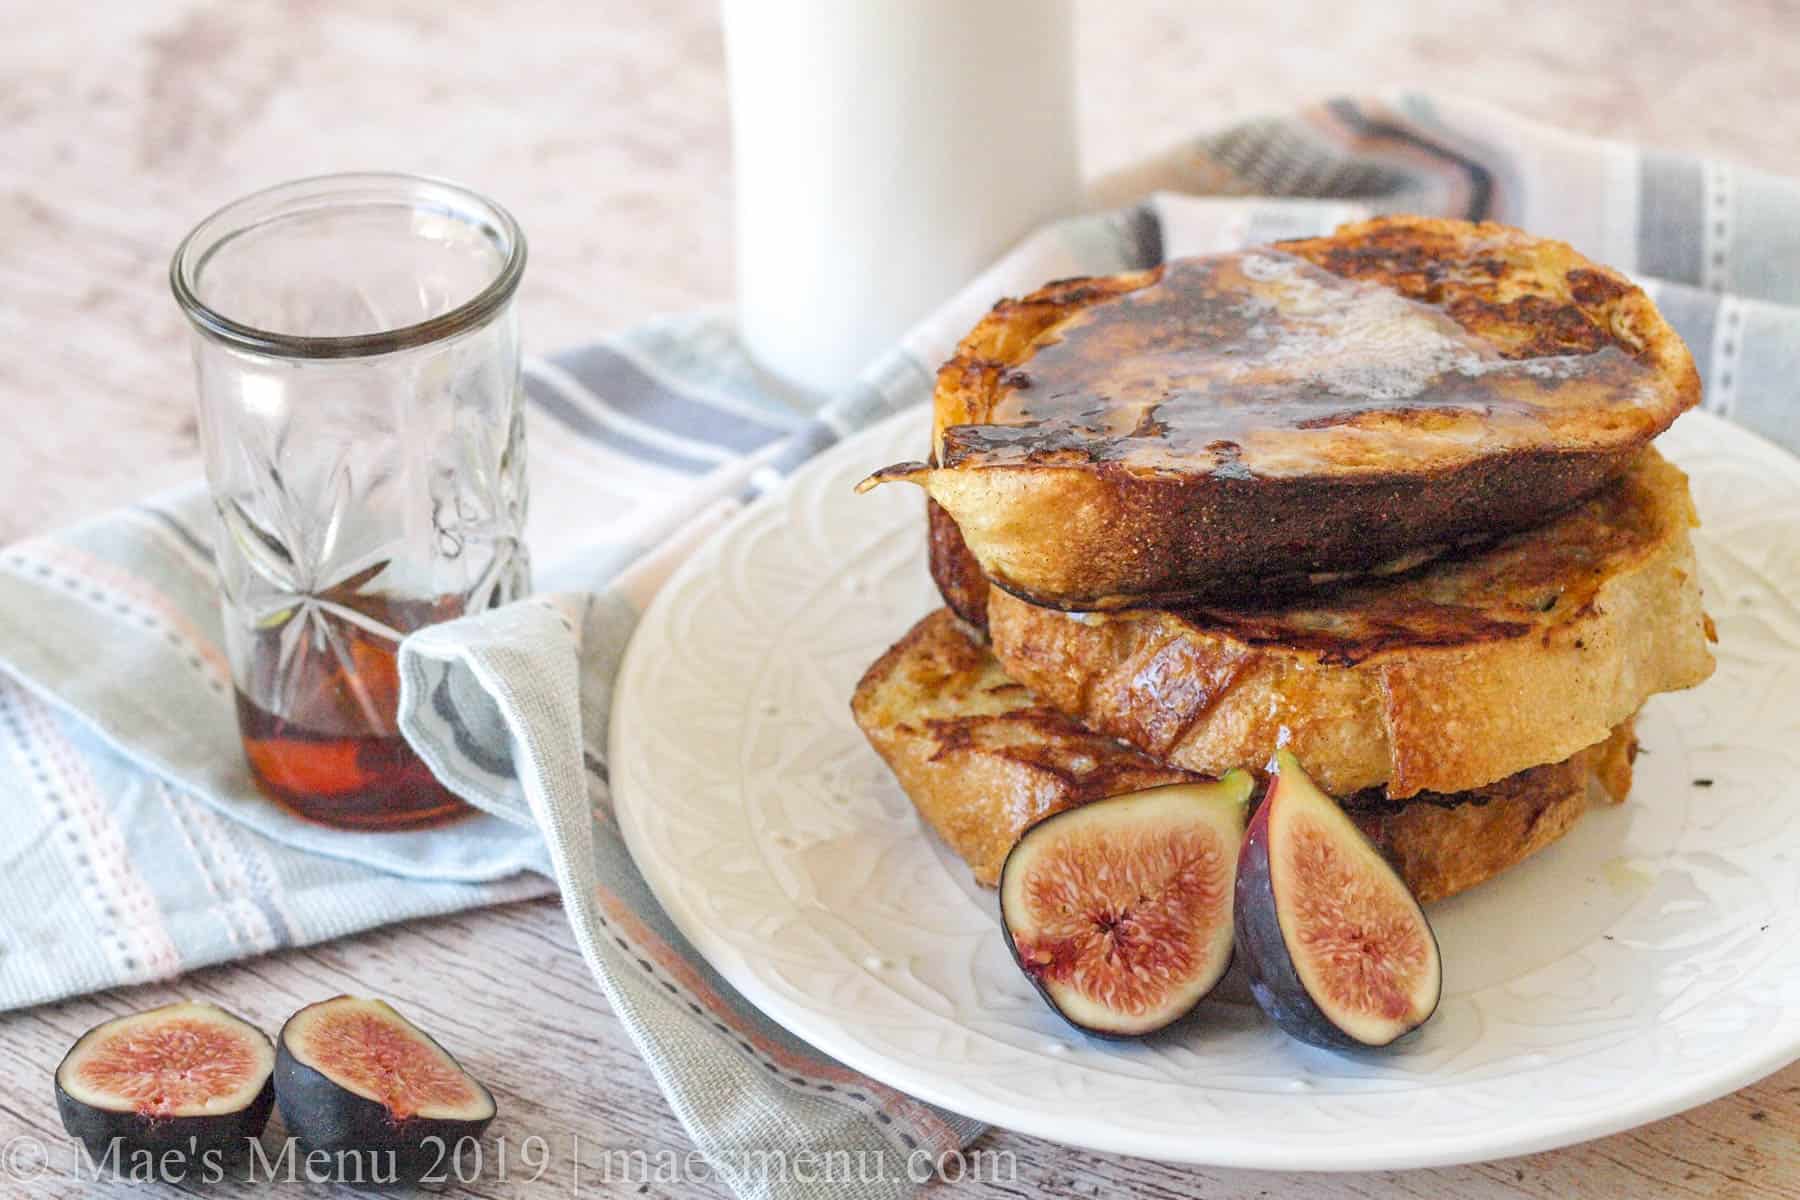 A stack of classic french toast next to figs, maple syrup, and a glass of milk.